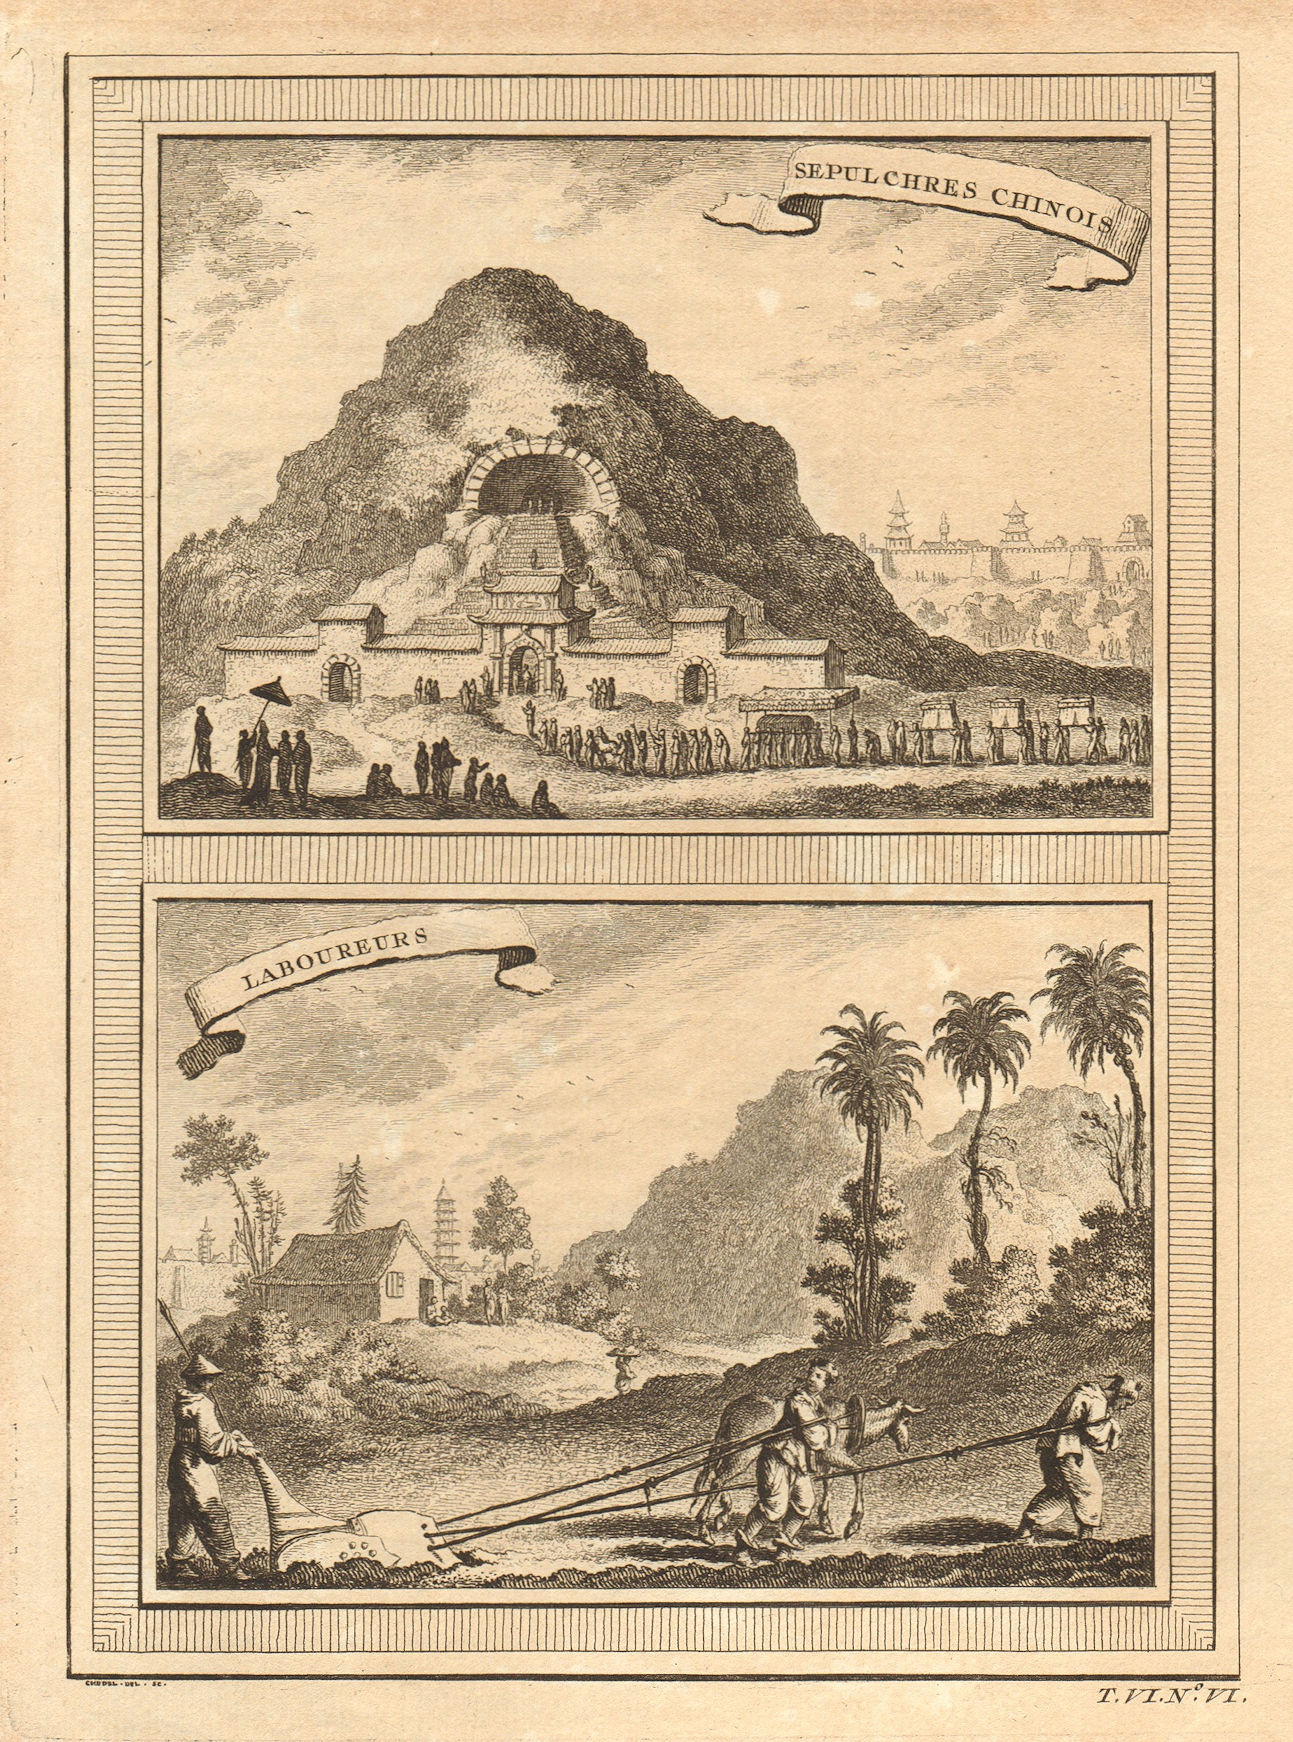 Associate Product 'Sepulchres Chinois; Laboureurs'. Chinese tombs / mausoleum. Farmers. China 1748